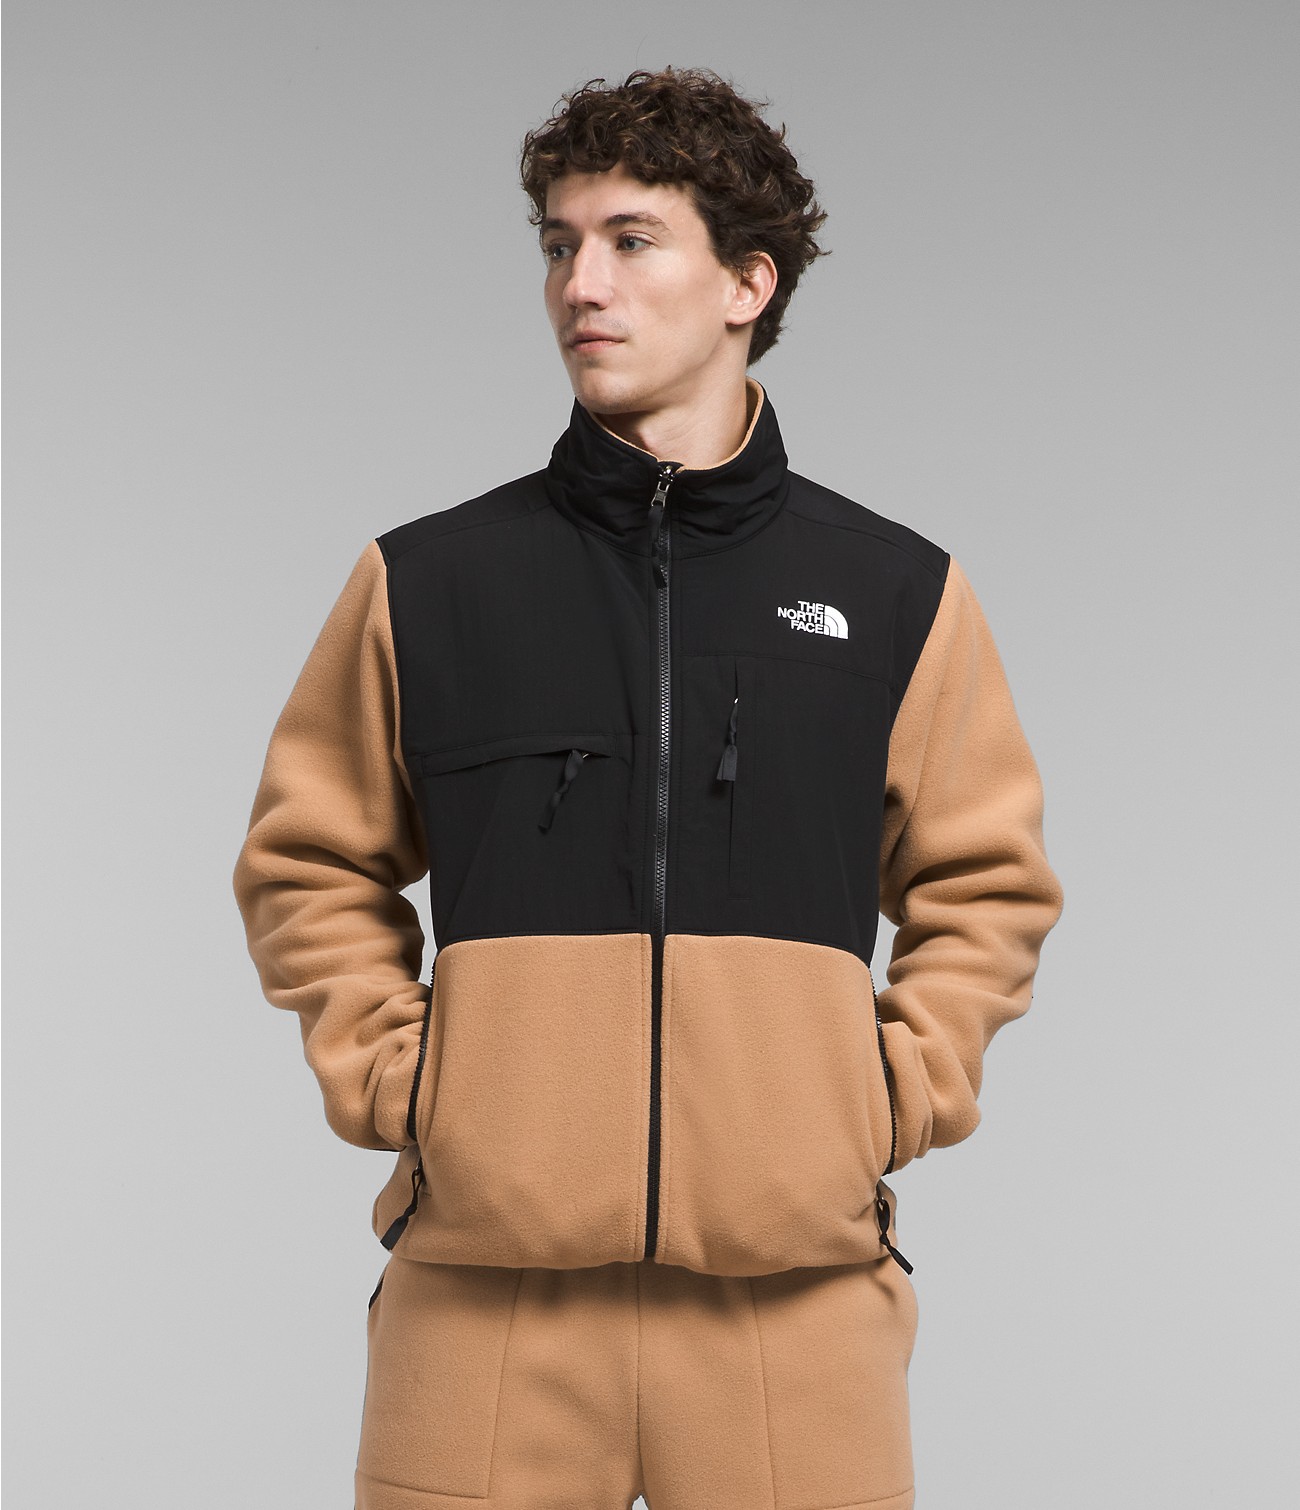 Unlock Wilderness' choice in the Woolrich Vs North Face comparison, the Denali Jacket by The North Face